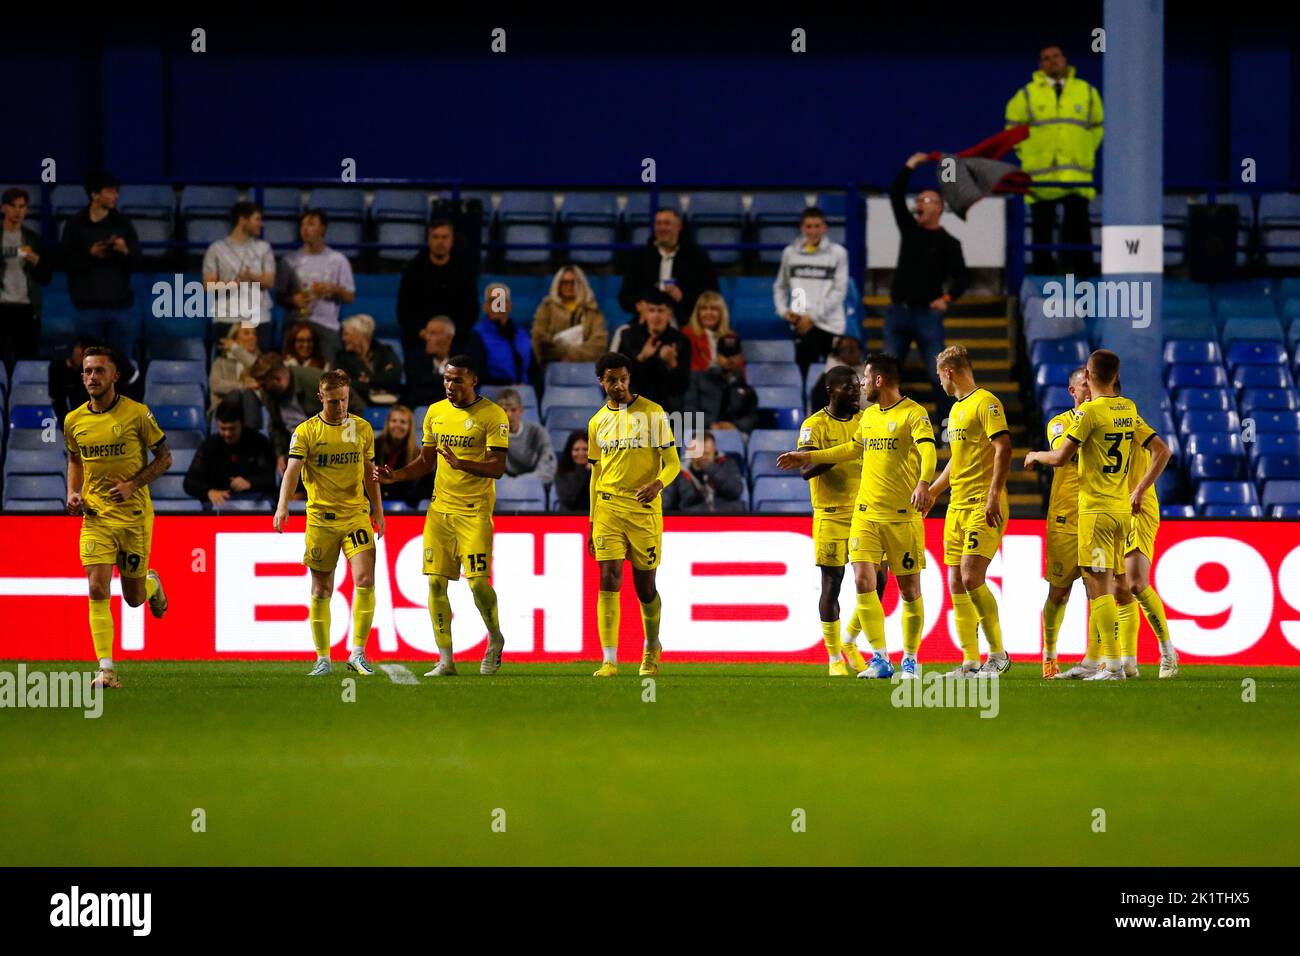 Davis Keillor-Dunn #10 of Burton Albion Celebrates scoring a goal to make it 2-3 during the Papa John's Trophy match Sheffield Wednesday vs Burton Albion at Hillsborough, Sheffield, United Kingdom, 20th September 2022  (Photo by Ben Early/News Images) Stock Photo